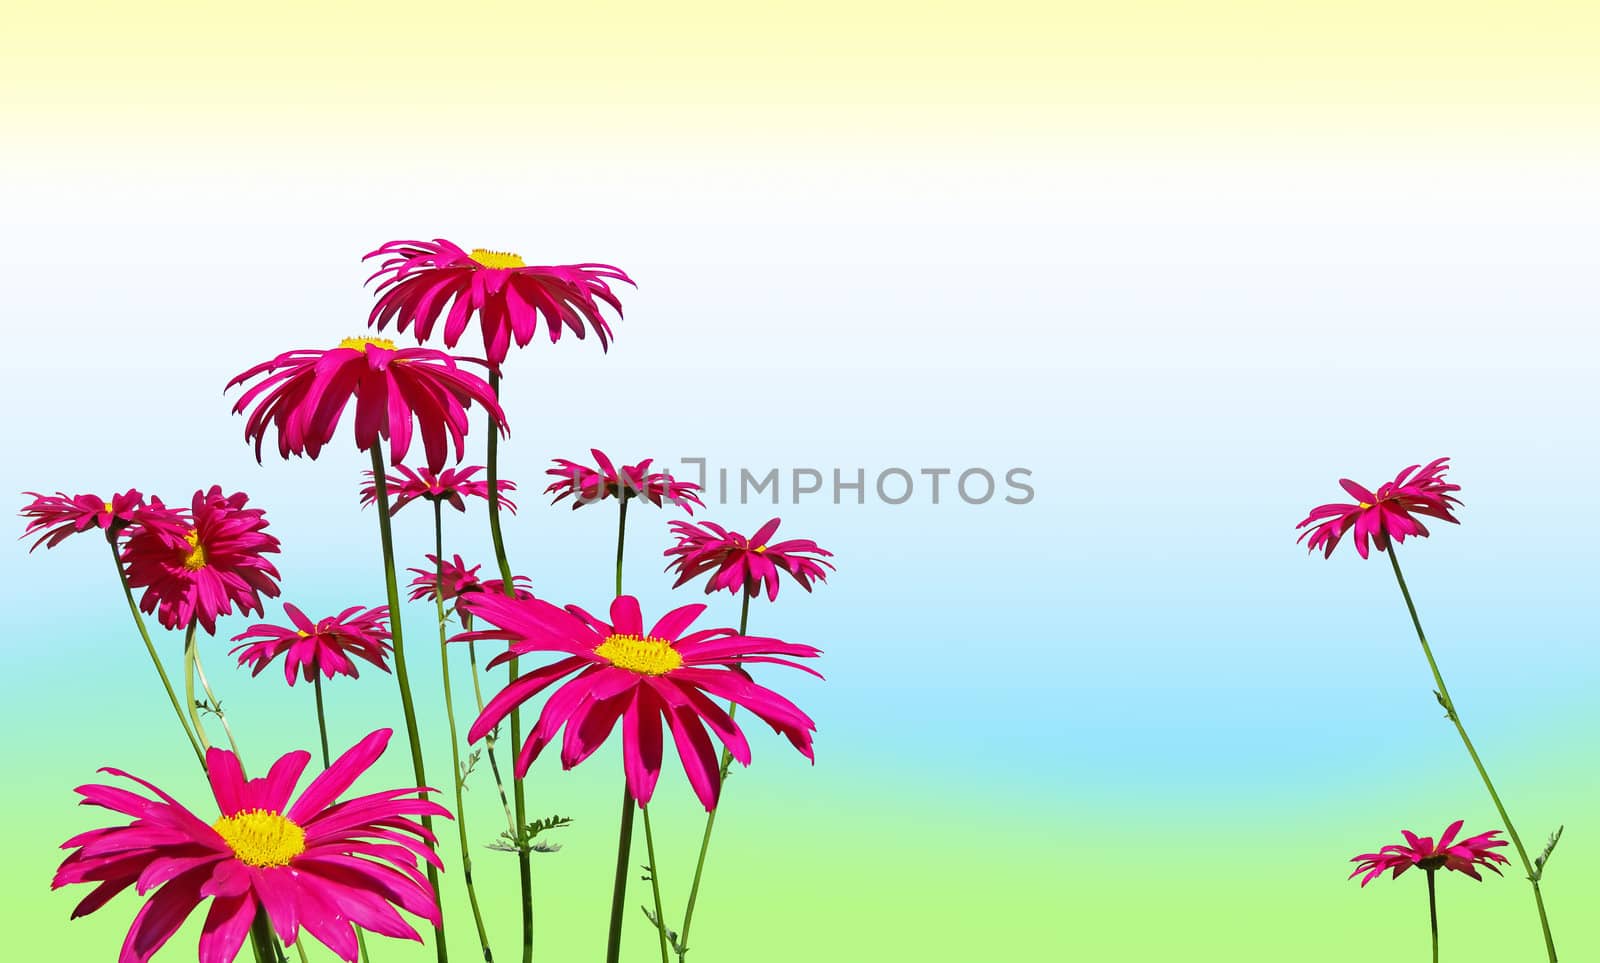 Sping or summer background: Very bright hot pink daisies on soft pastel green, blue and yellow.